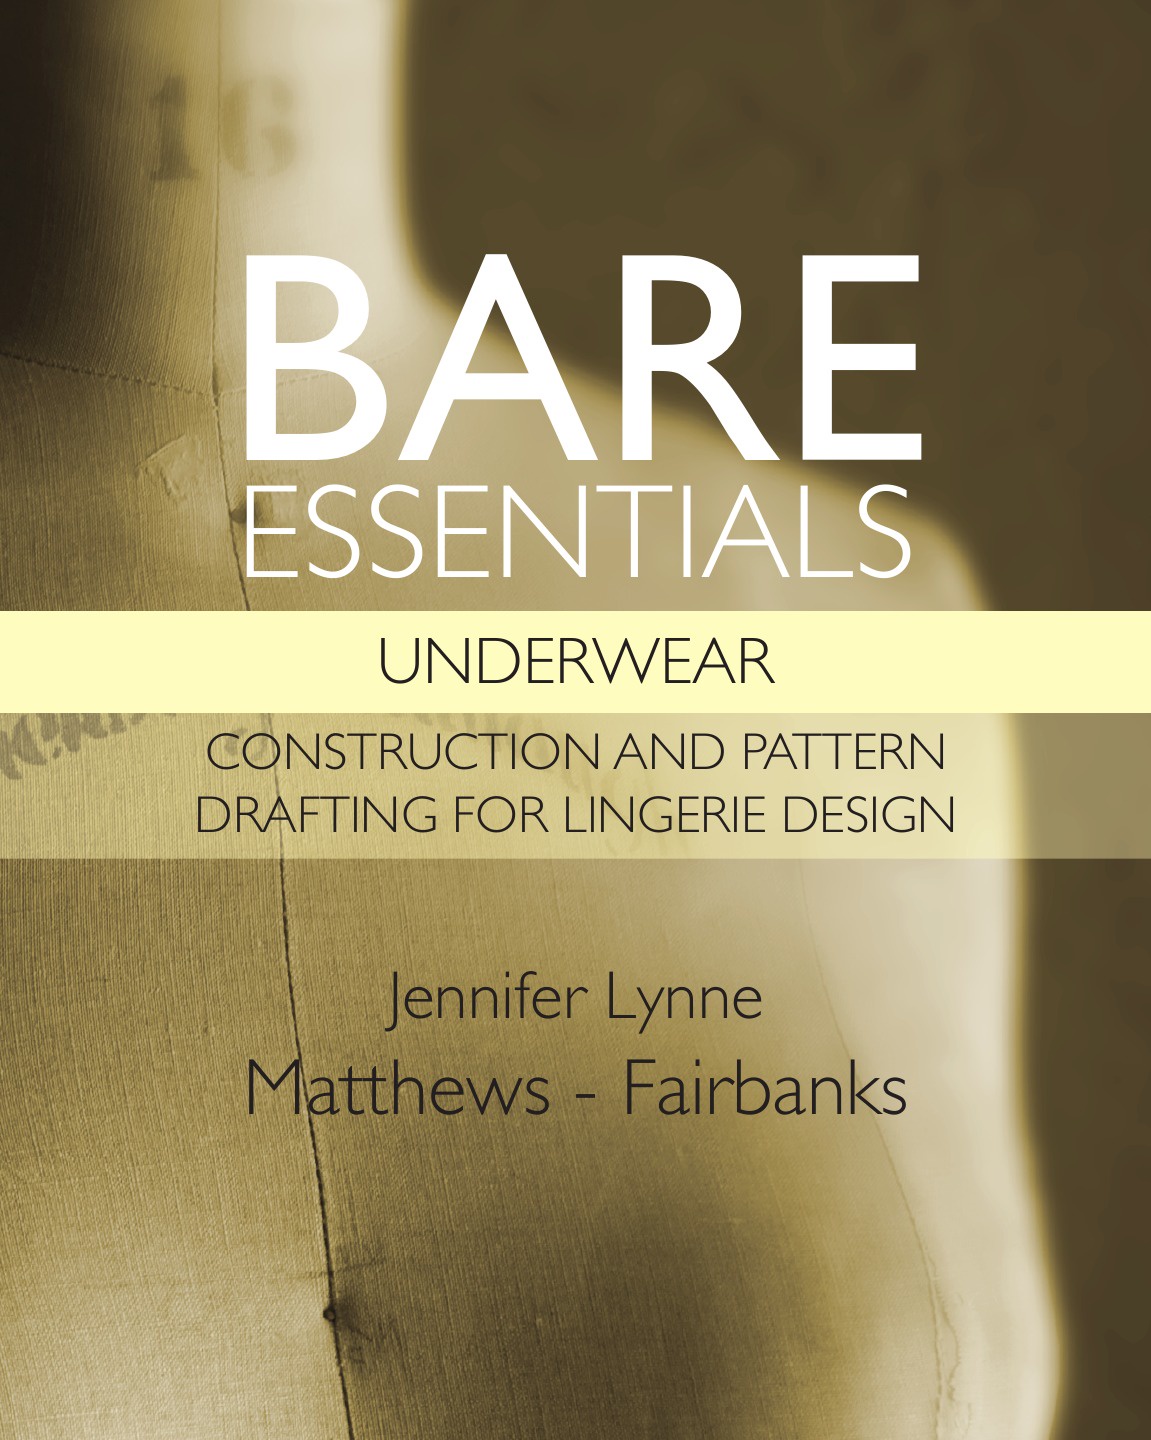 фото Bare Essentials. Underwear - Construction and Pattern Drafting for Lingerie Design